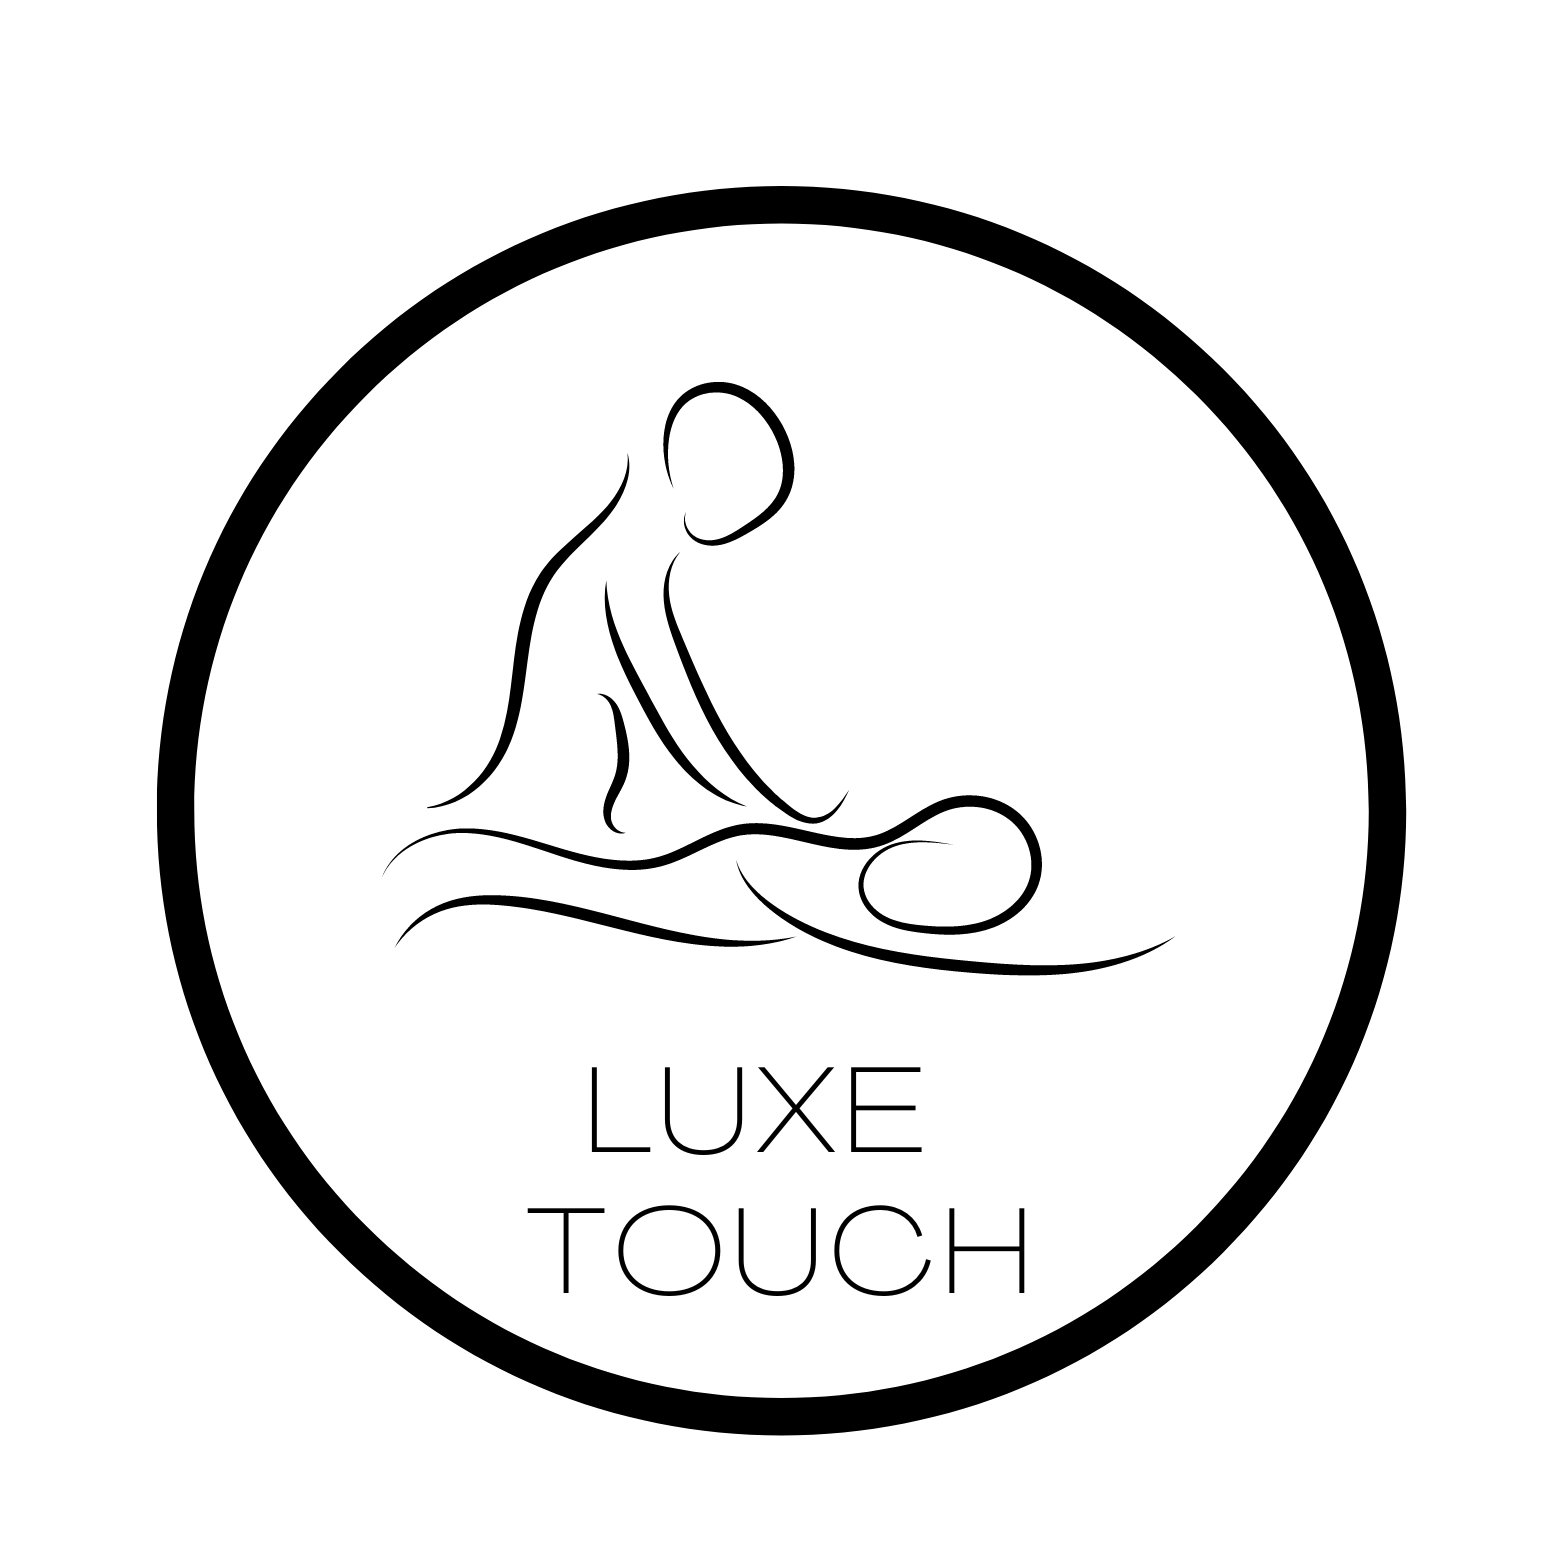 The Luxe Touch